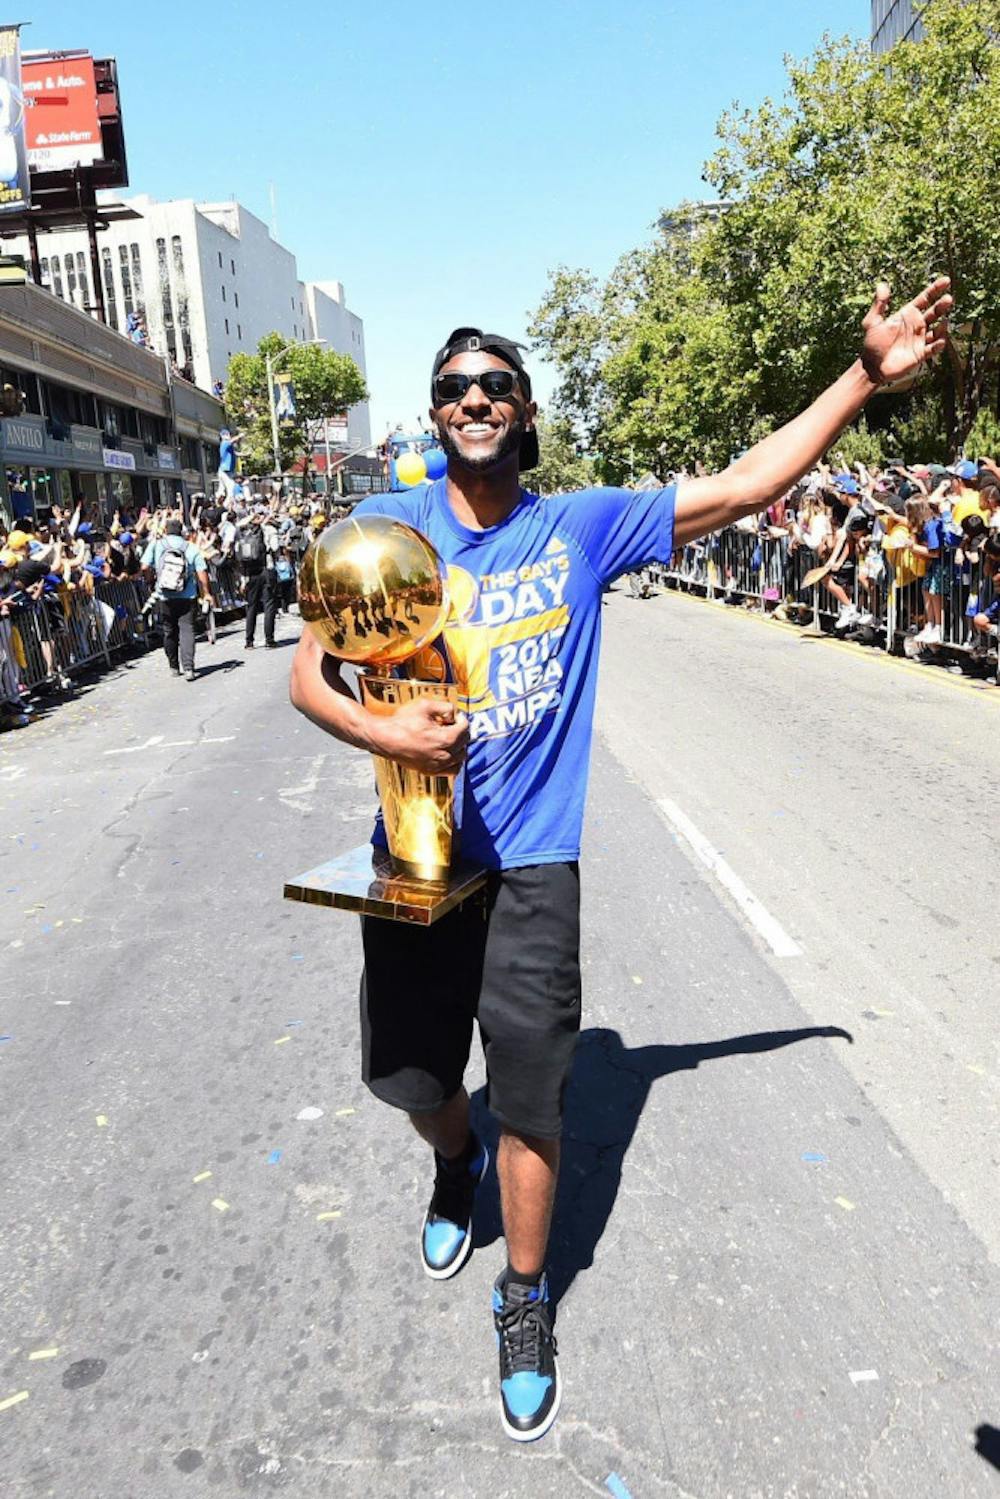 <p class="p1"><span class="s1">Germantwon High School alumnus Ian Clark holds the Larry O’Brien Trophy on June 15 in Oakland, California. The former Golden State Warrior has now signed with the New Orleans Pelicans.</span></p>